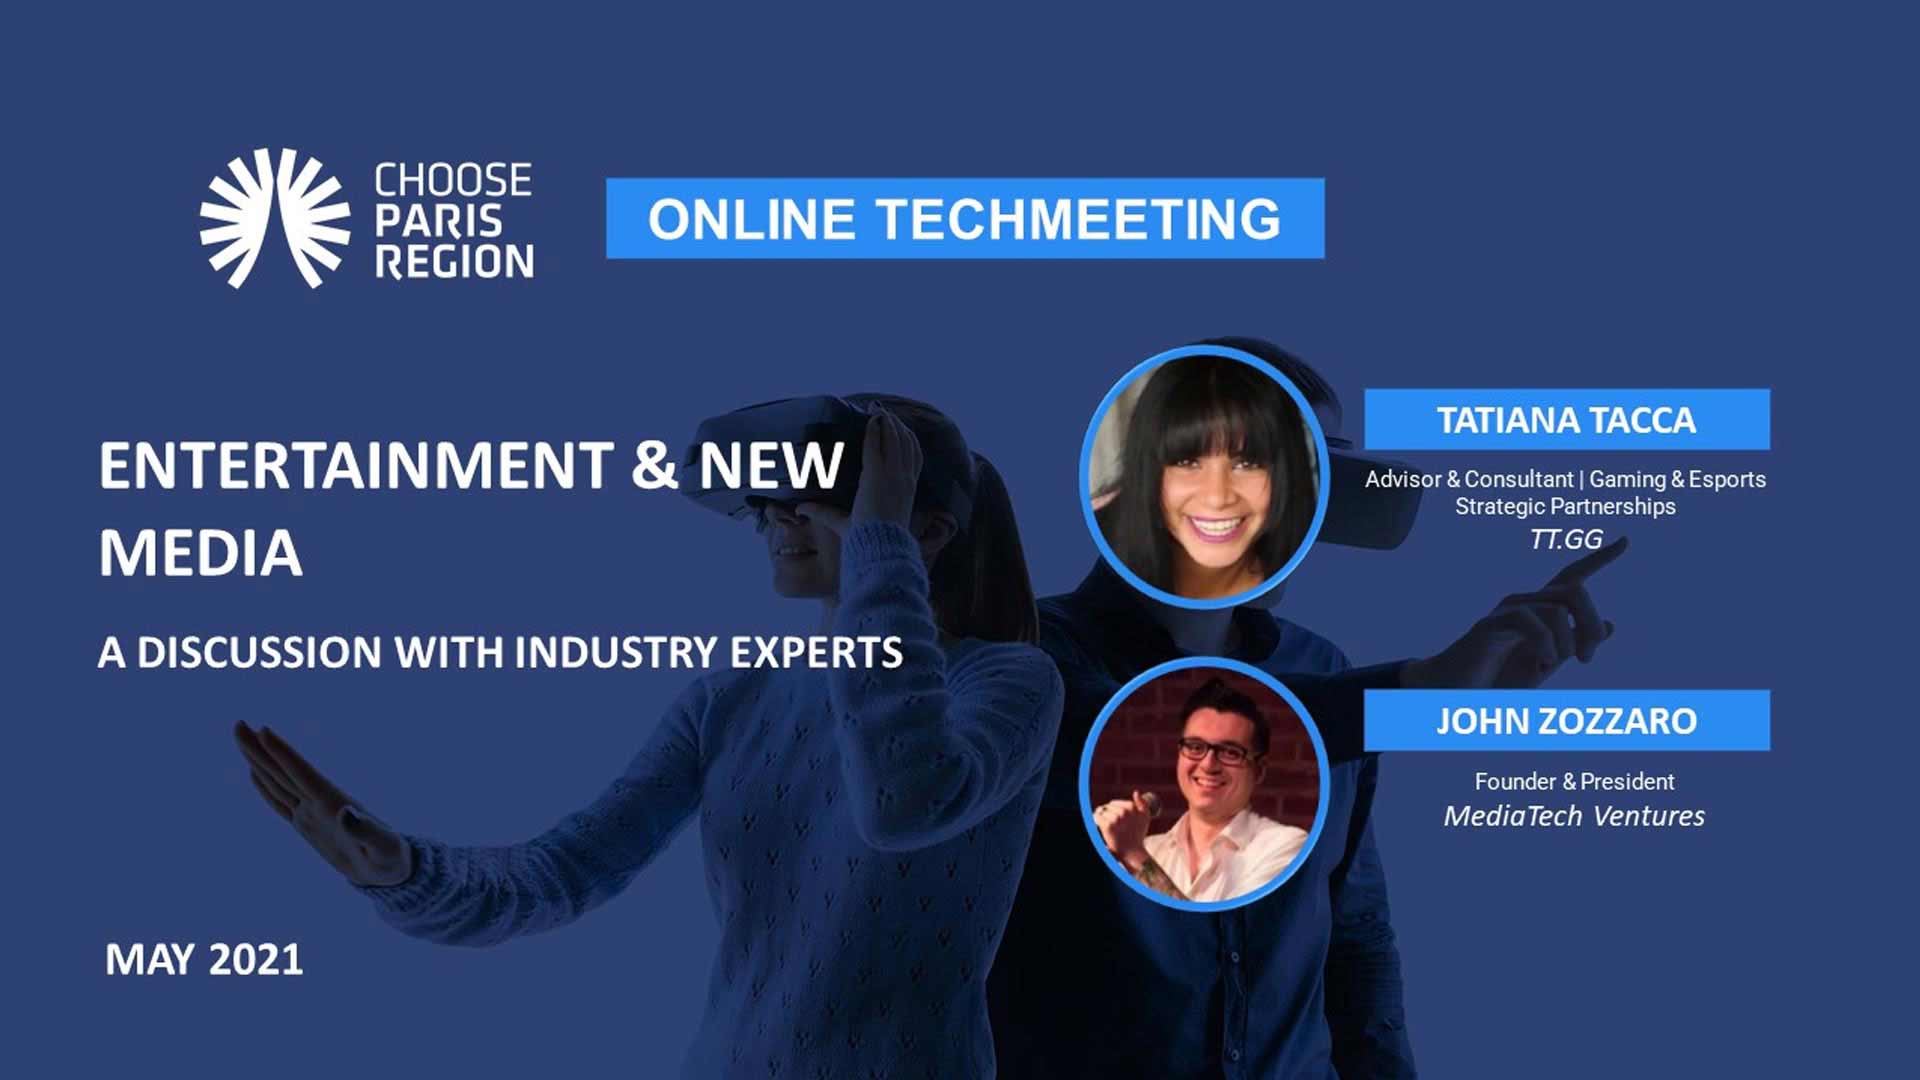 Entertainment & New Media Industry: Metaverse, Digitization during Covid-19, Next Revolutions… A discussion with industry experts, Tatianna Tacca & John Zozzaro